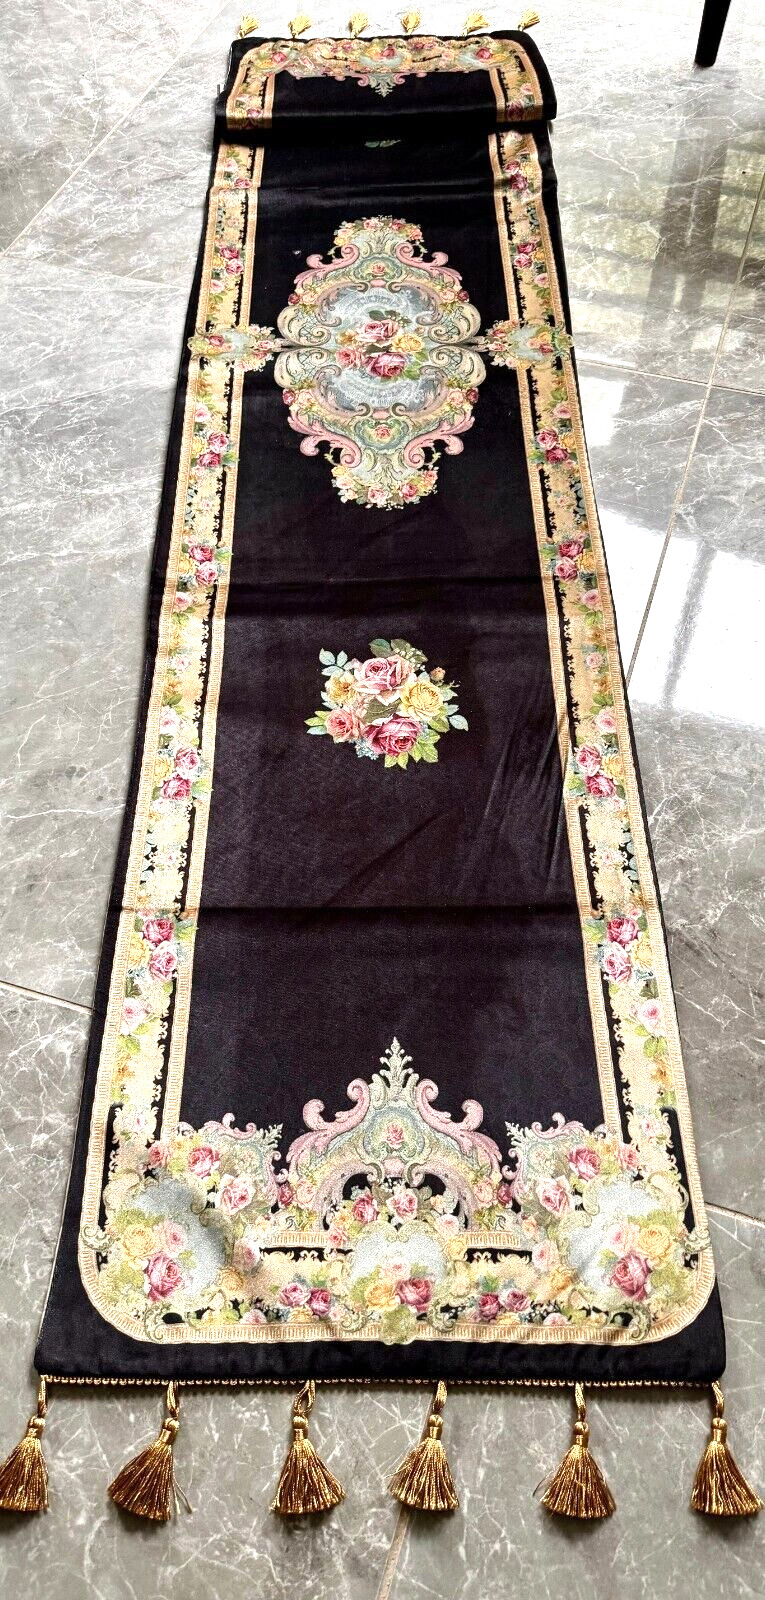 Decoration Michal Negrin Beautiful Table Cloth Runner Colorful flowers #1#